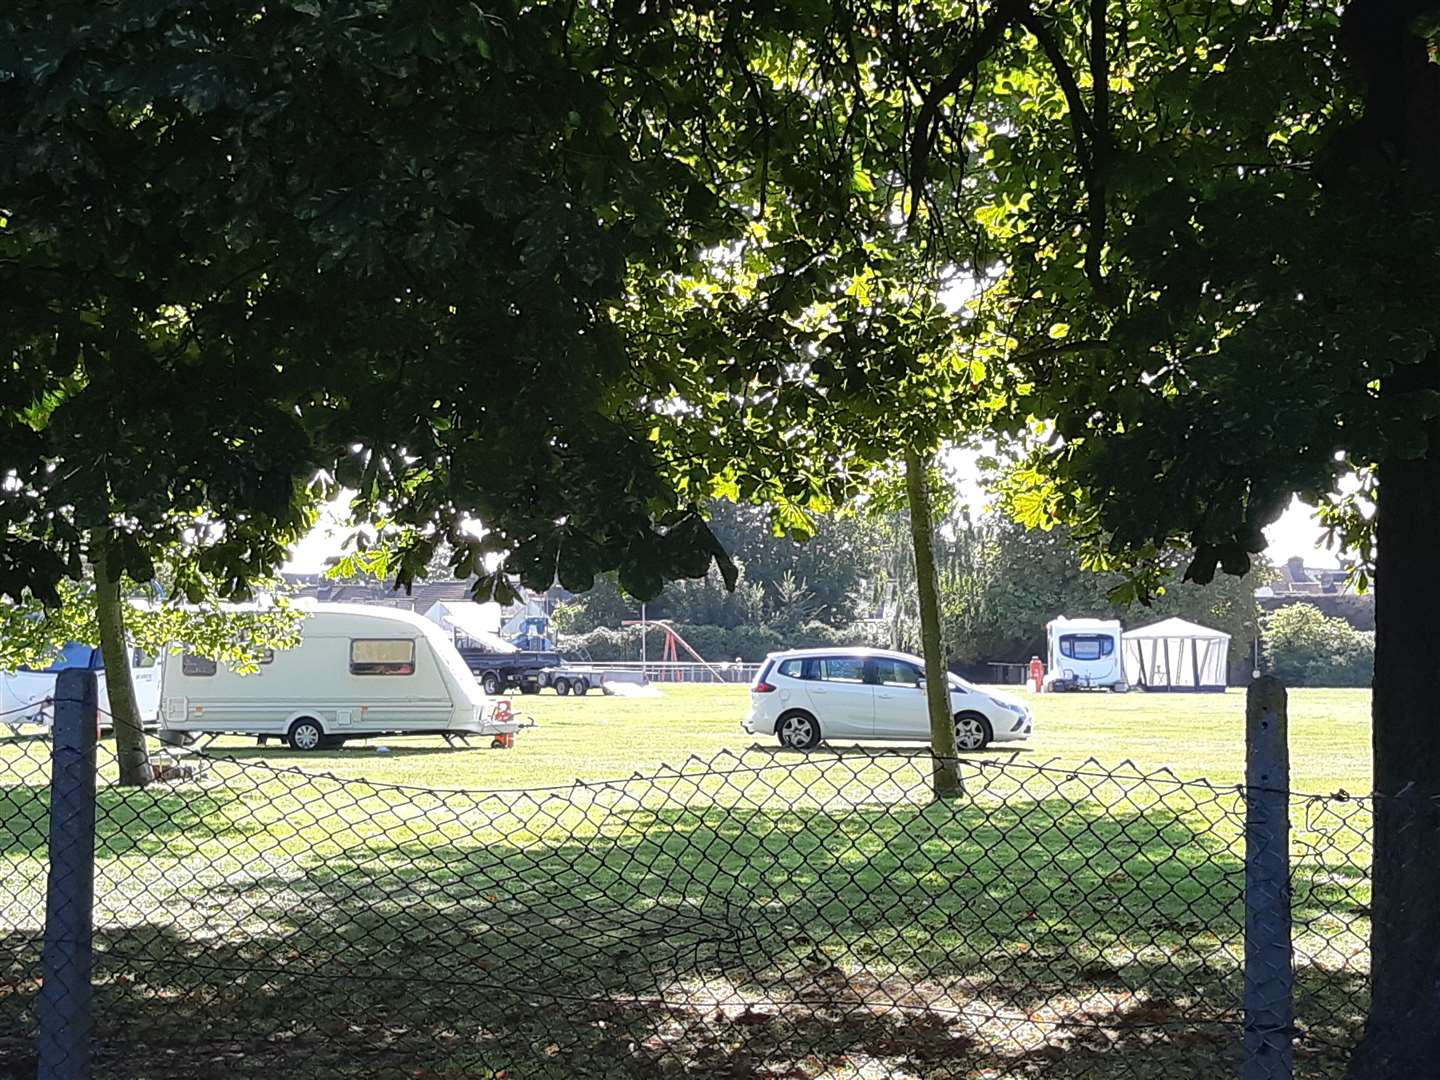 The council says its representatives will visit the caravans at Victoria Park in Deal today